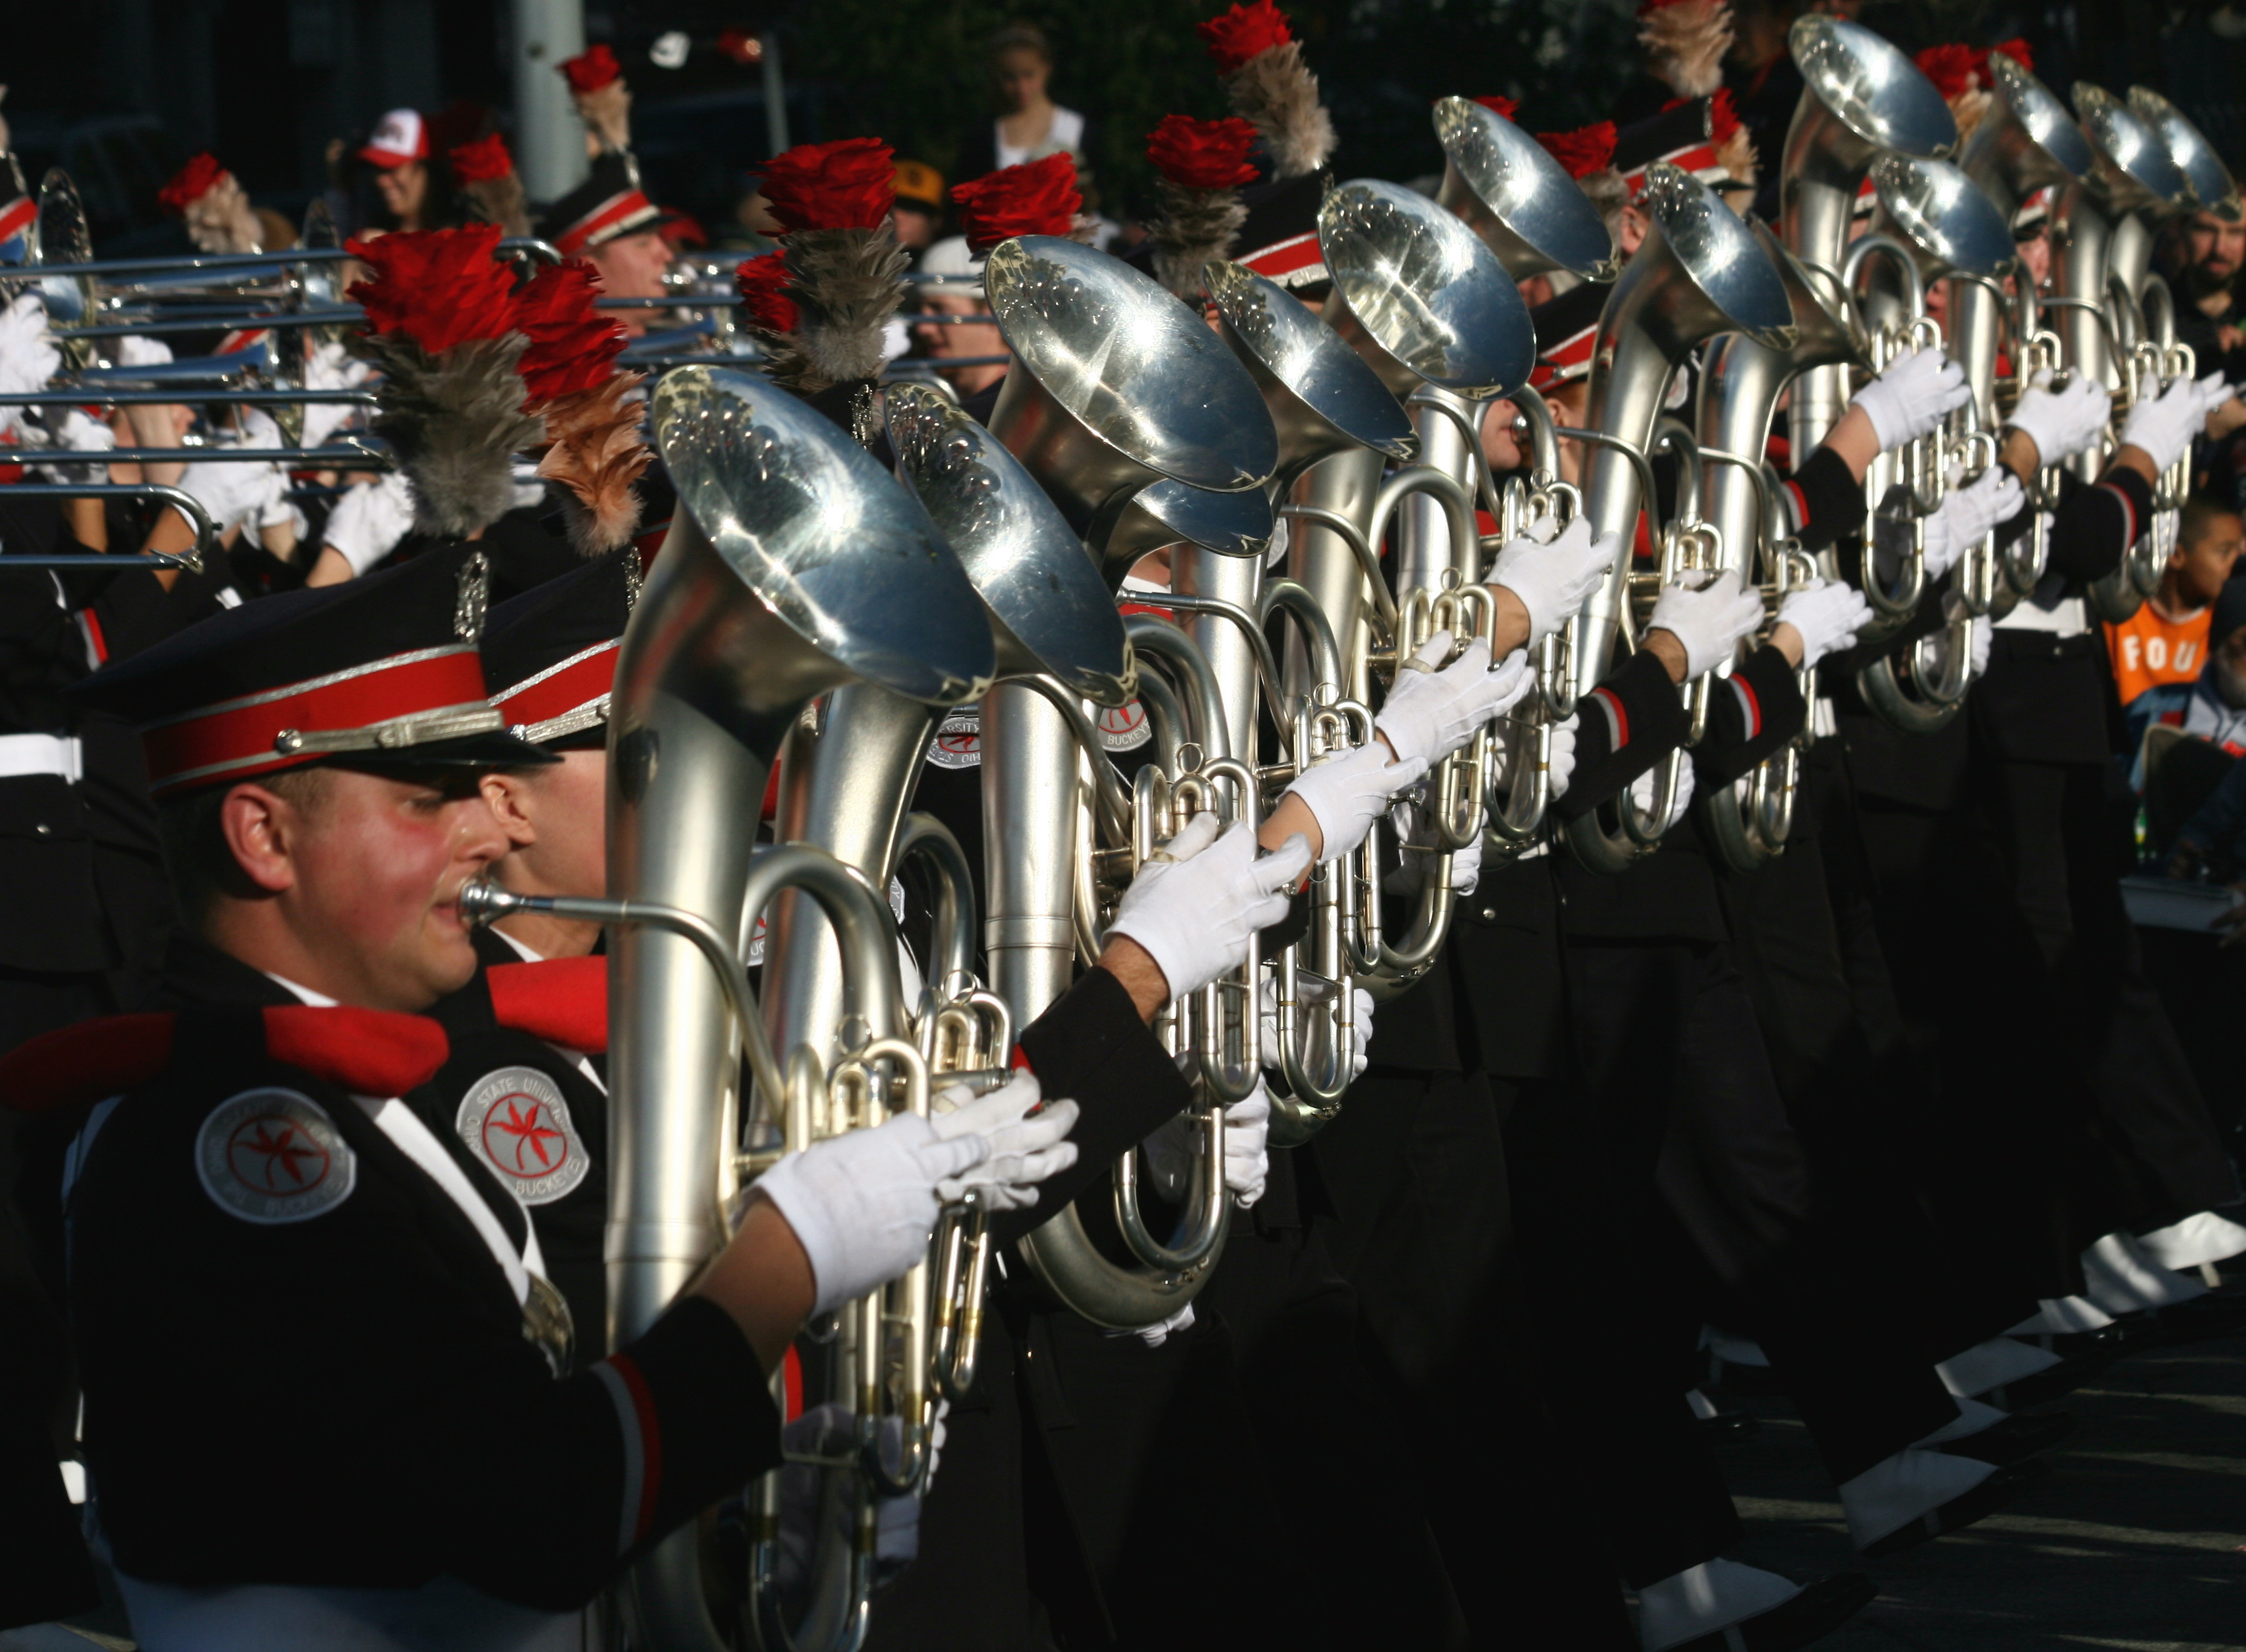 The Ohio State University marching band came under fire for a 2014 songbook that contained lyrics referencing the Holocaust. | <a href="https://www.flickr.com/photos/prayitnophotography/4248223658">Supplied by Prayitno Hadinata</a> (CC-2.0)